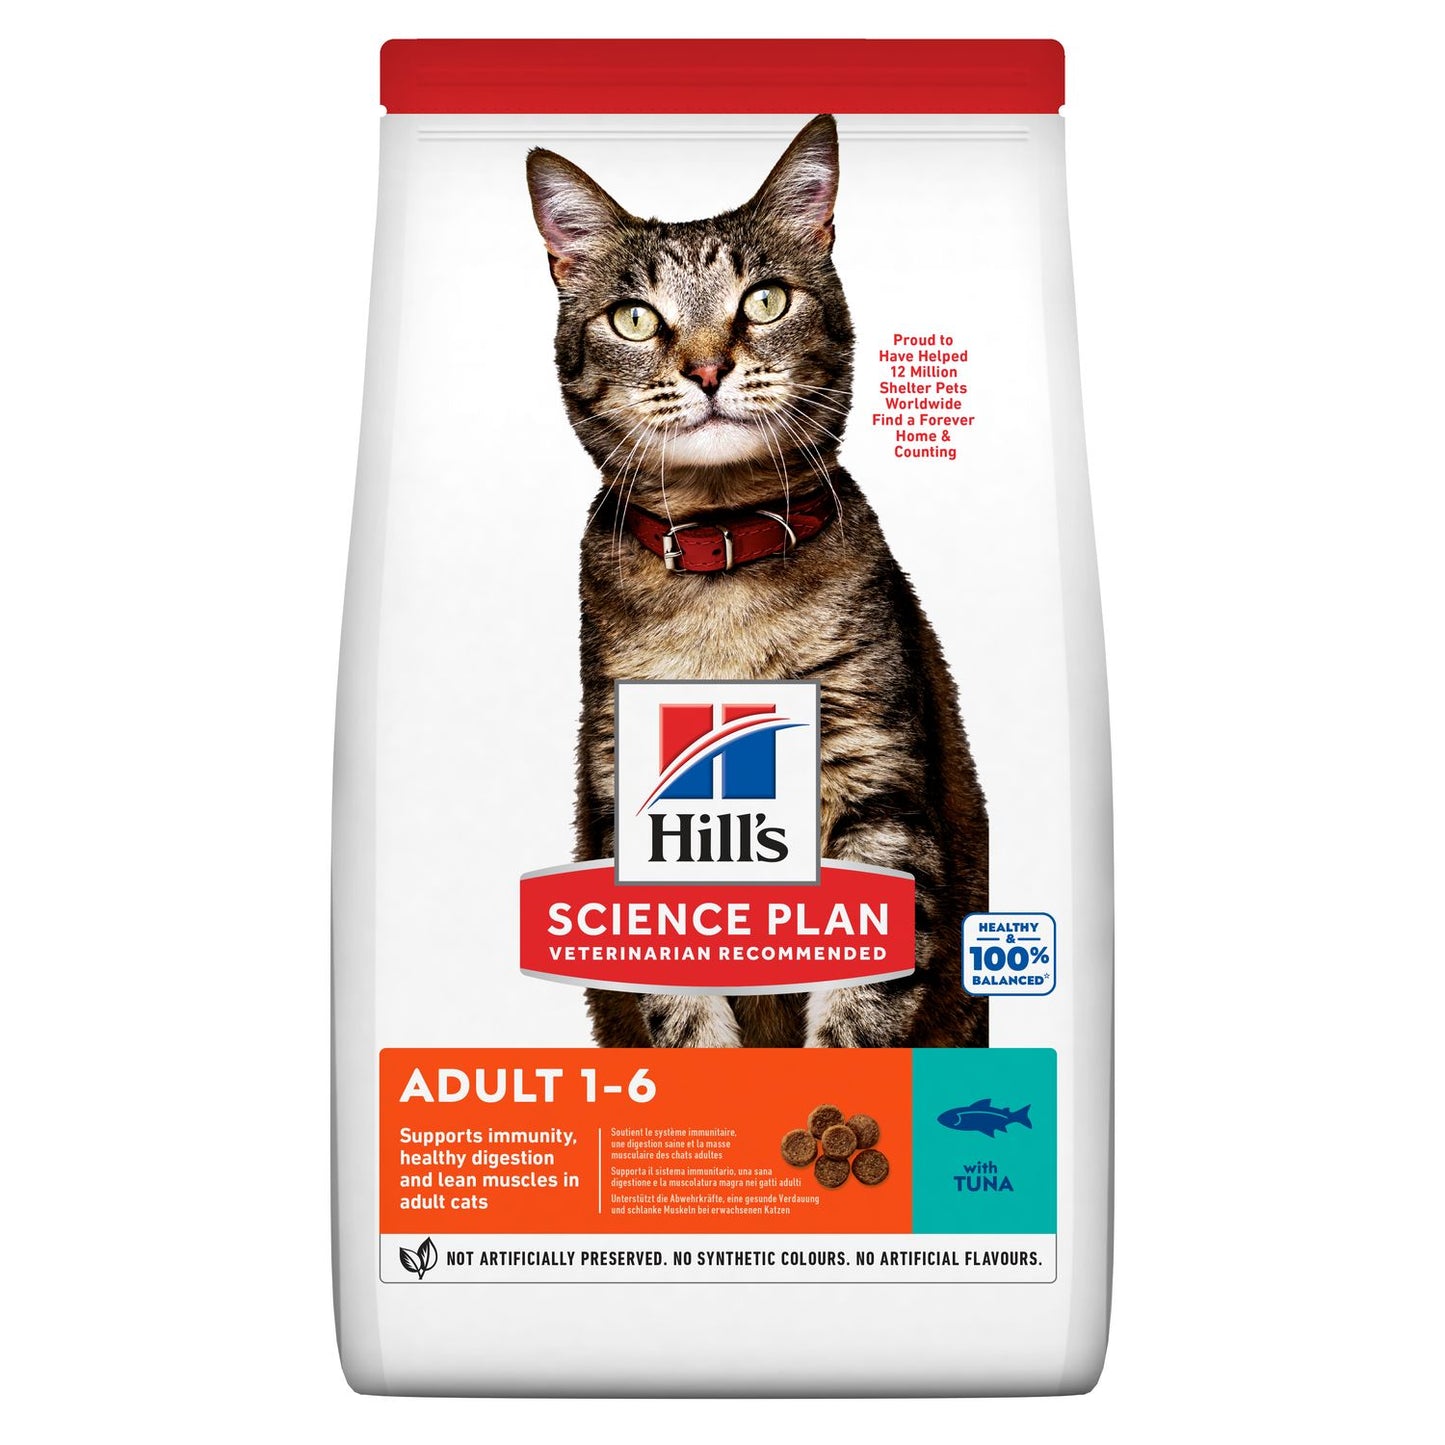 Hill's Science Plan Adult Cat Dry Food with Tuna